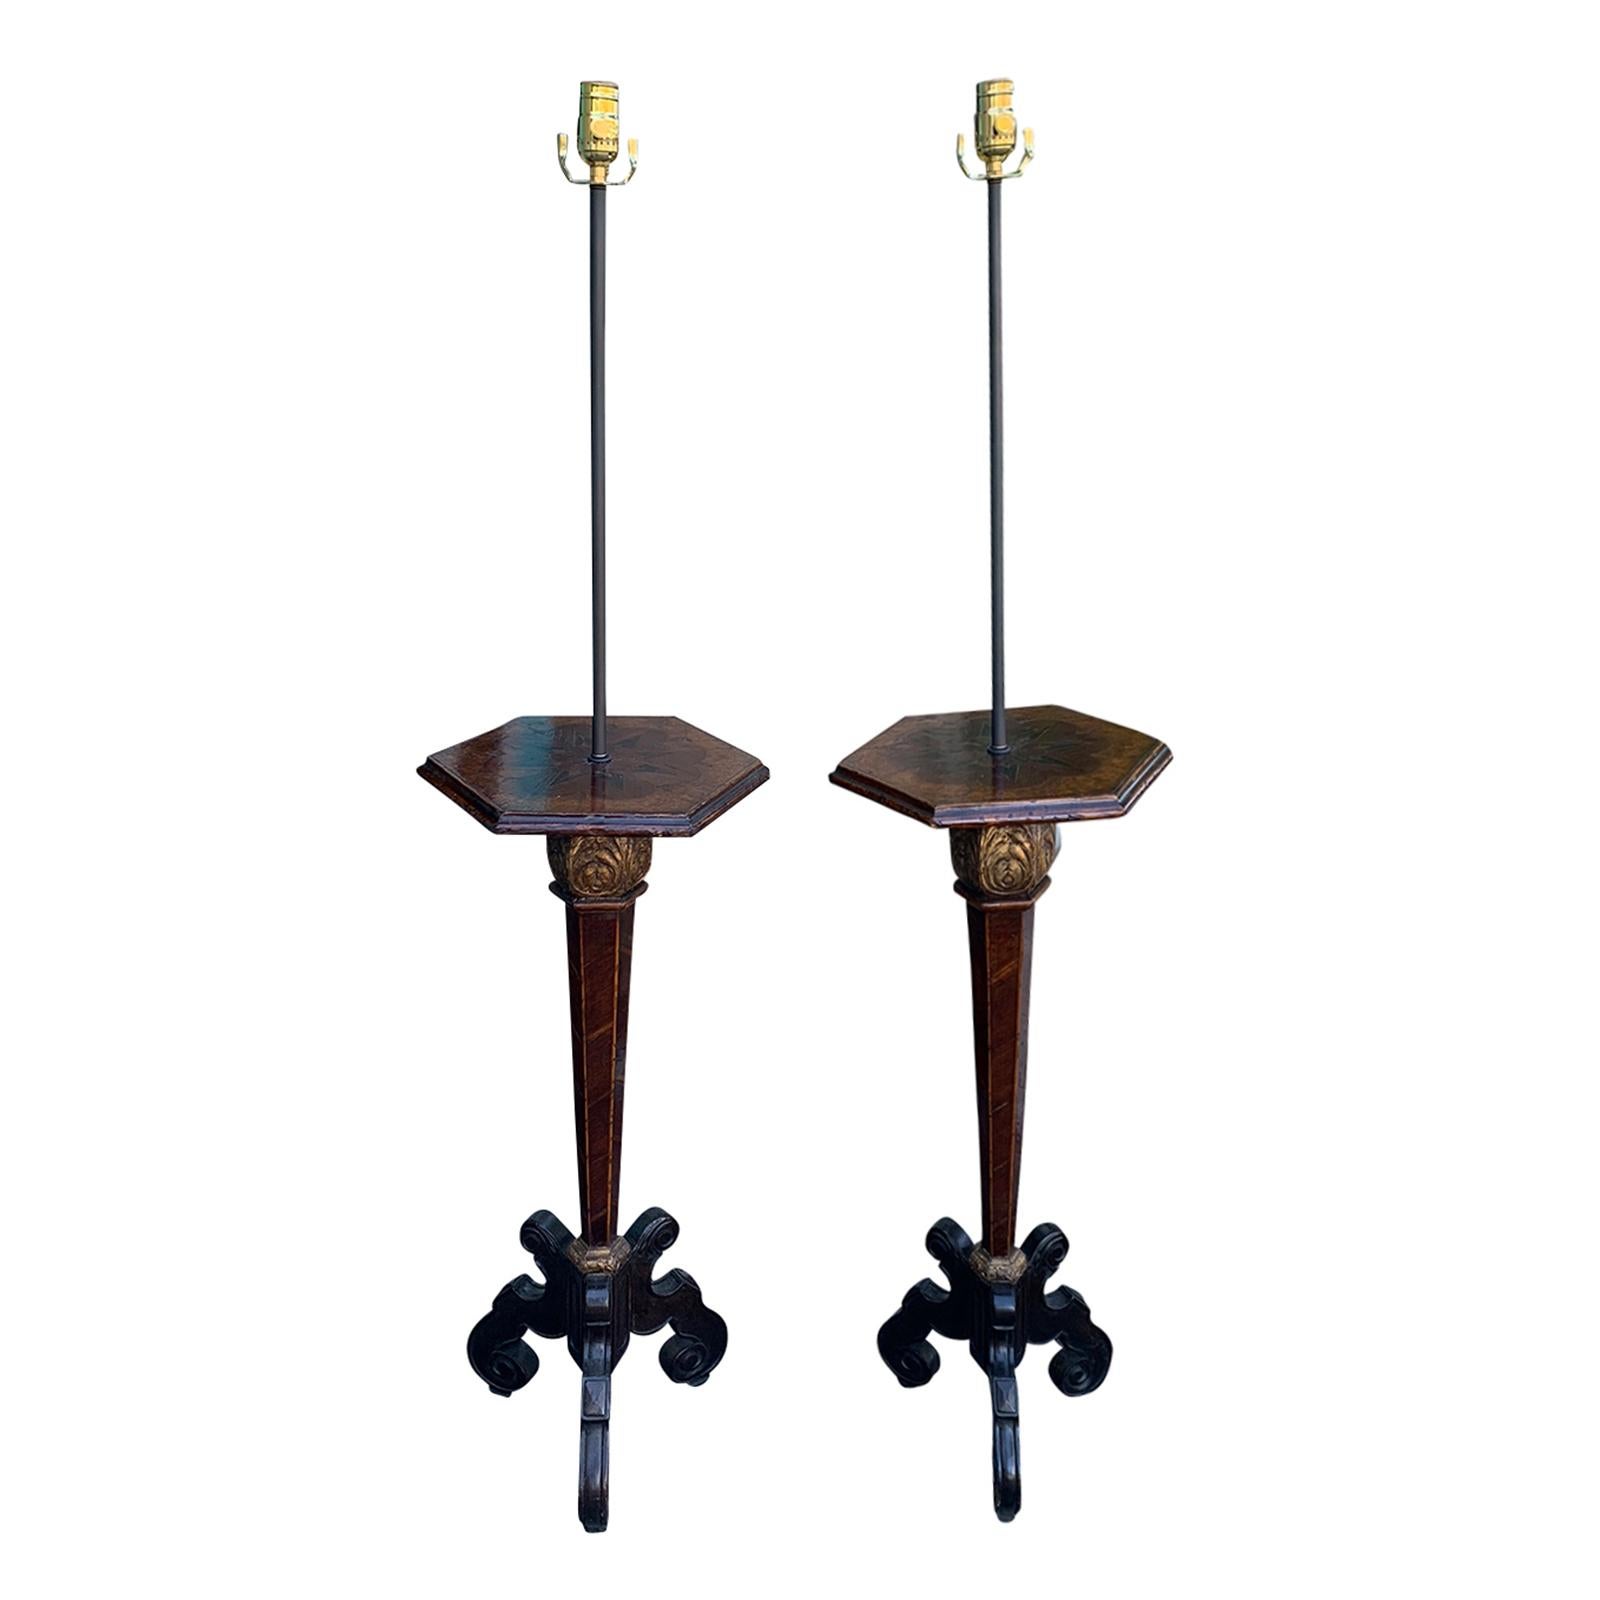 Pair of 18th-19th Century Inlaid Continental Pedestals as Floor Lamps